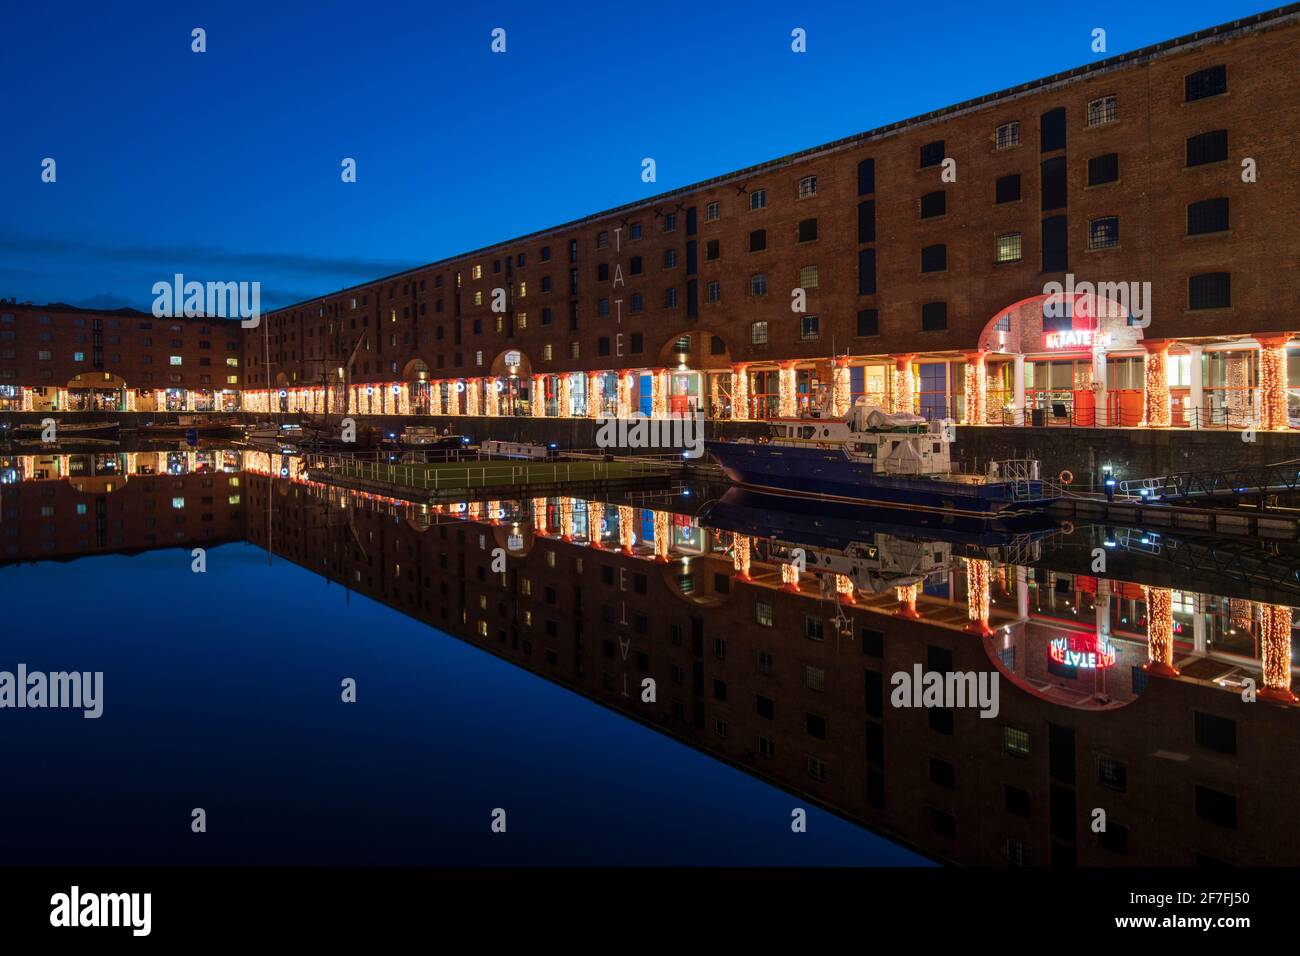 Reflected view at Christmas of The Royal Albert Dock and Tate Museum, Liverpool, Merseyside, England, United Kingdom, Europe Stock Photo